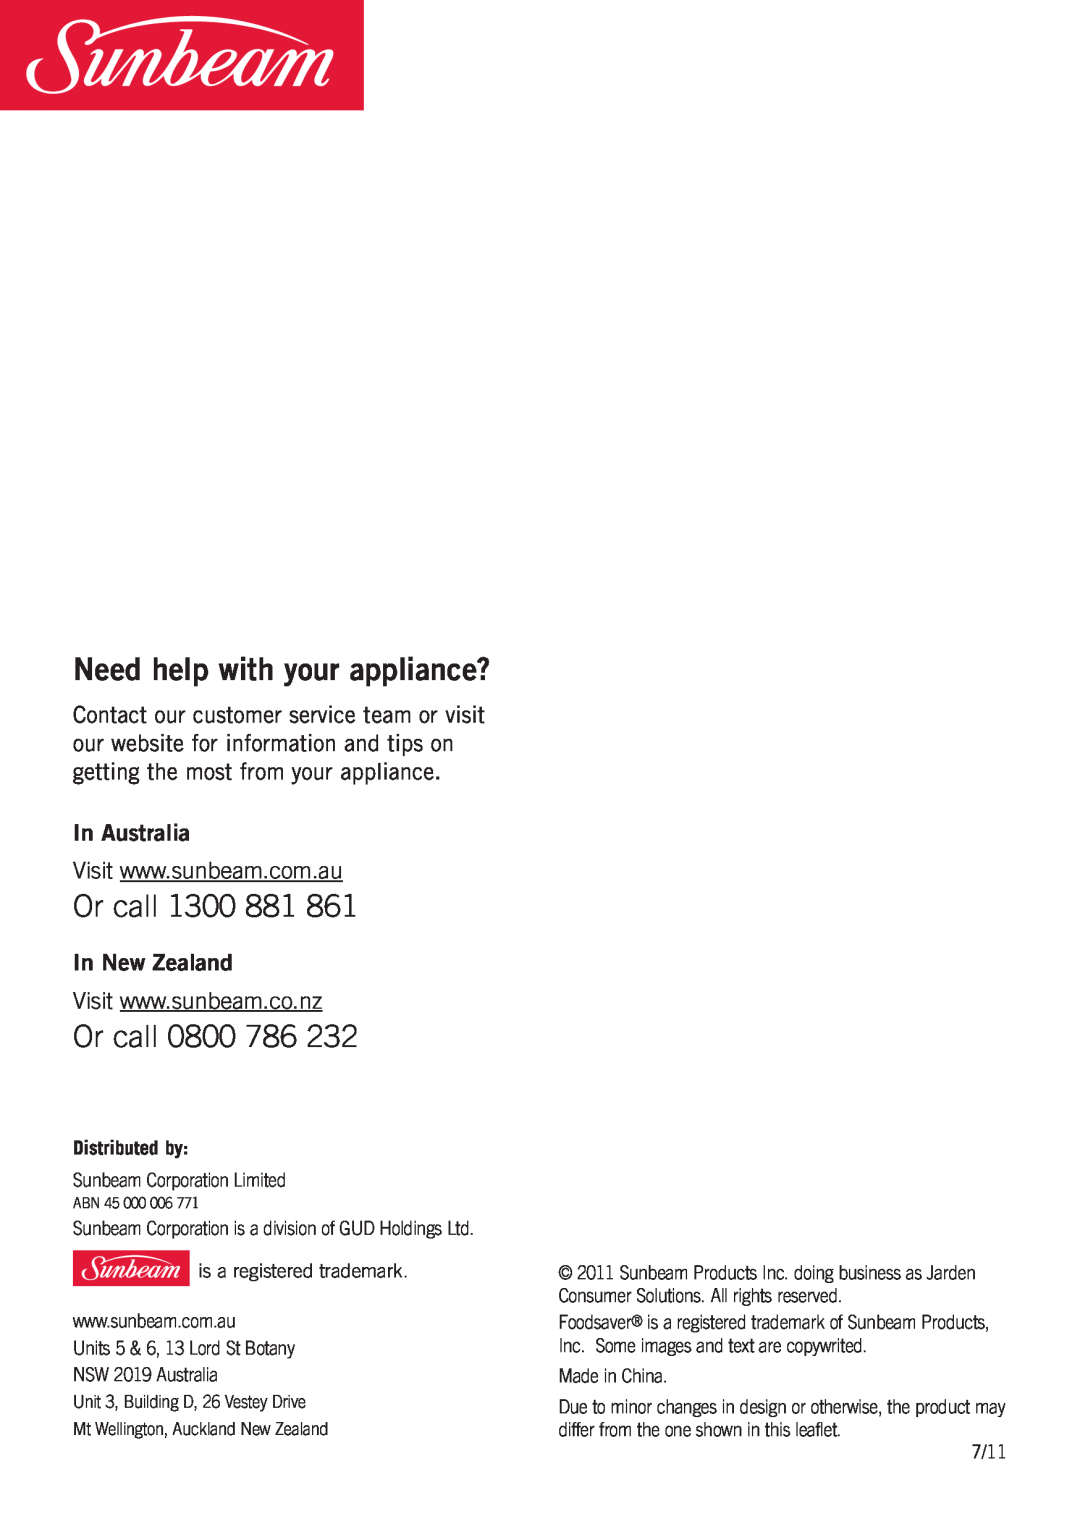 Sunbeam VS7800 Or call, In Australia, In New Zealand, Need help with your appliance?, Distributed by, NSW 2019 Australia 